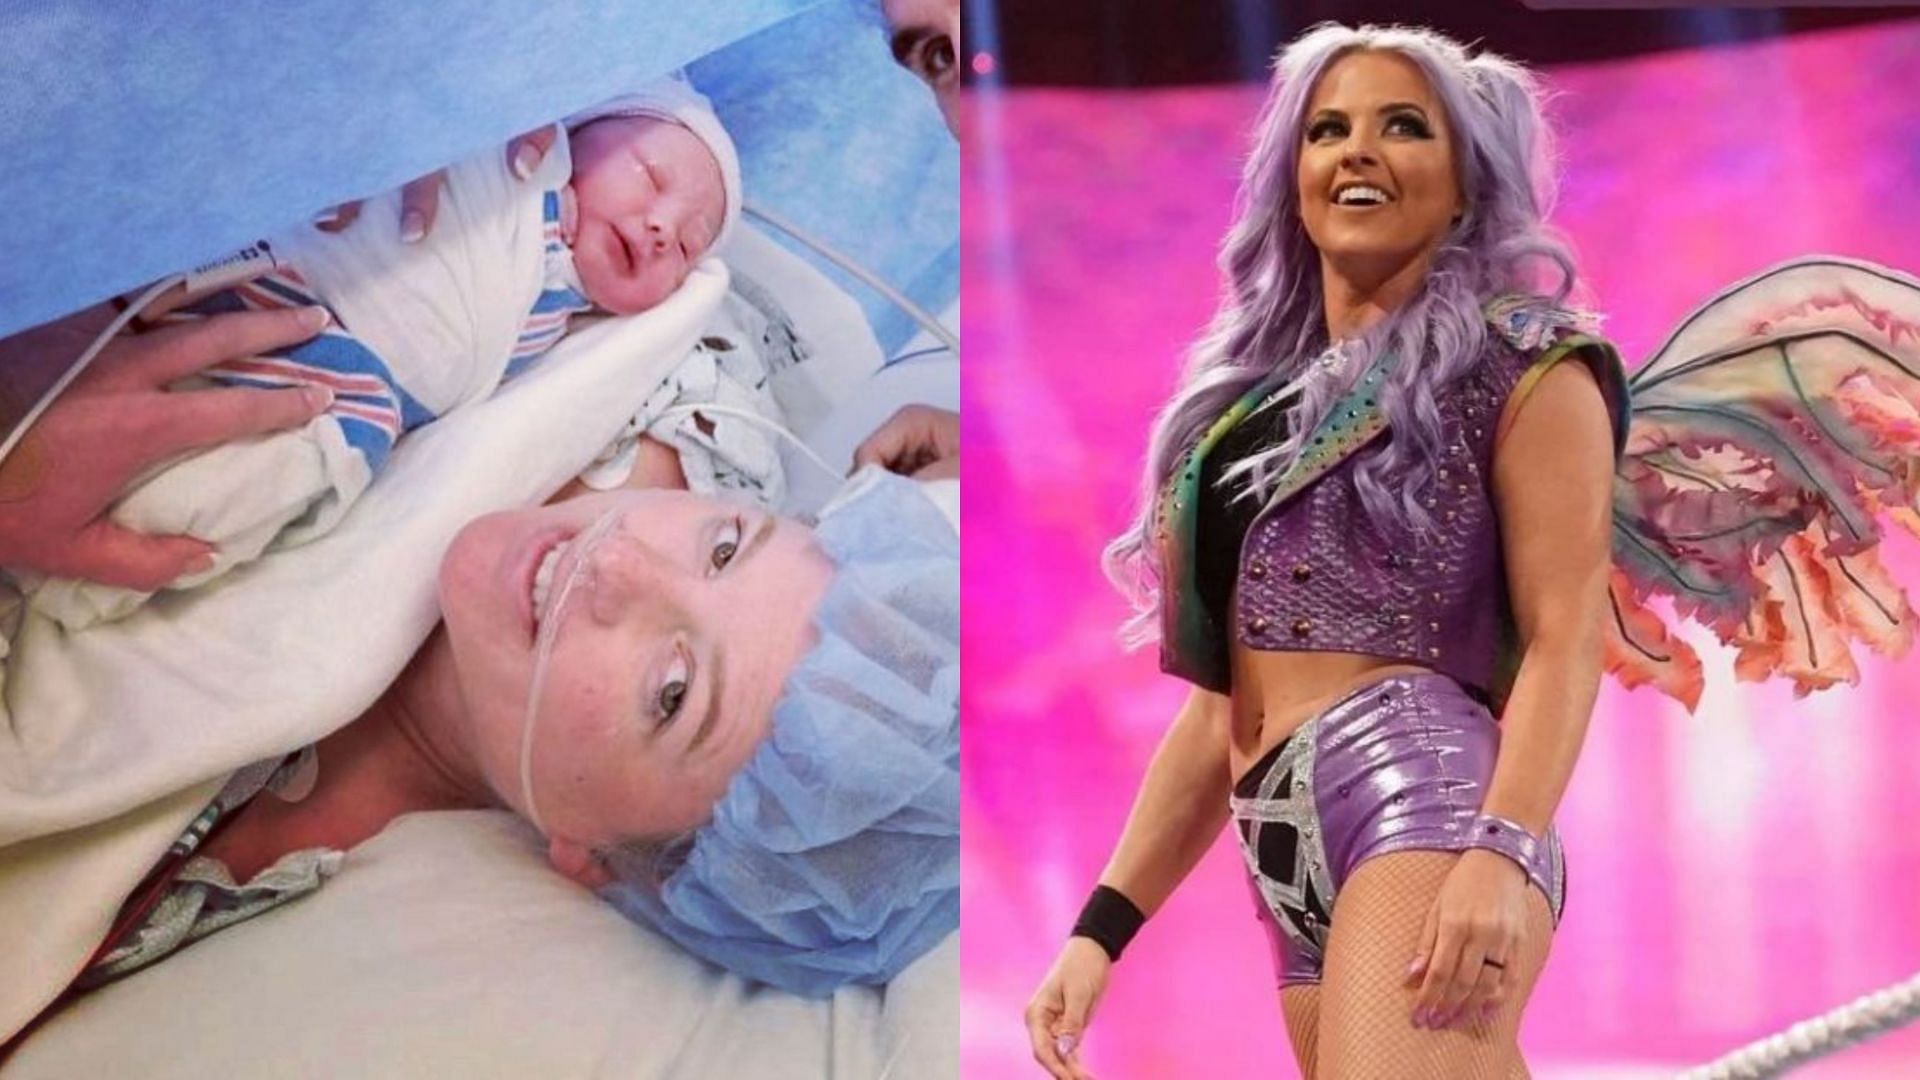 Candice LeRae gave birth to her son last February